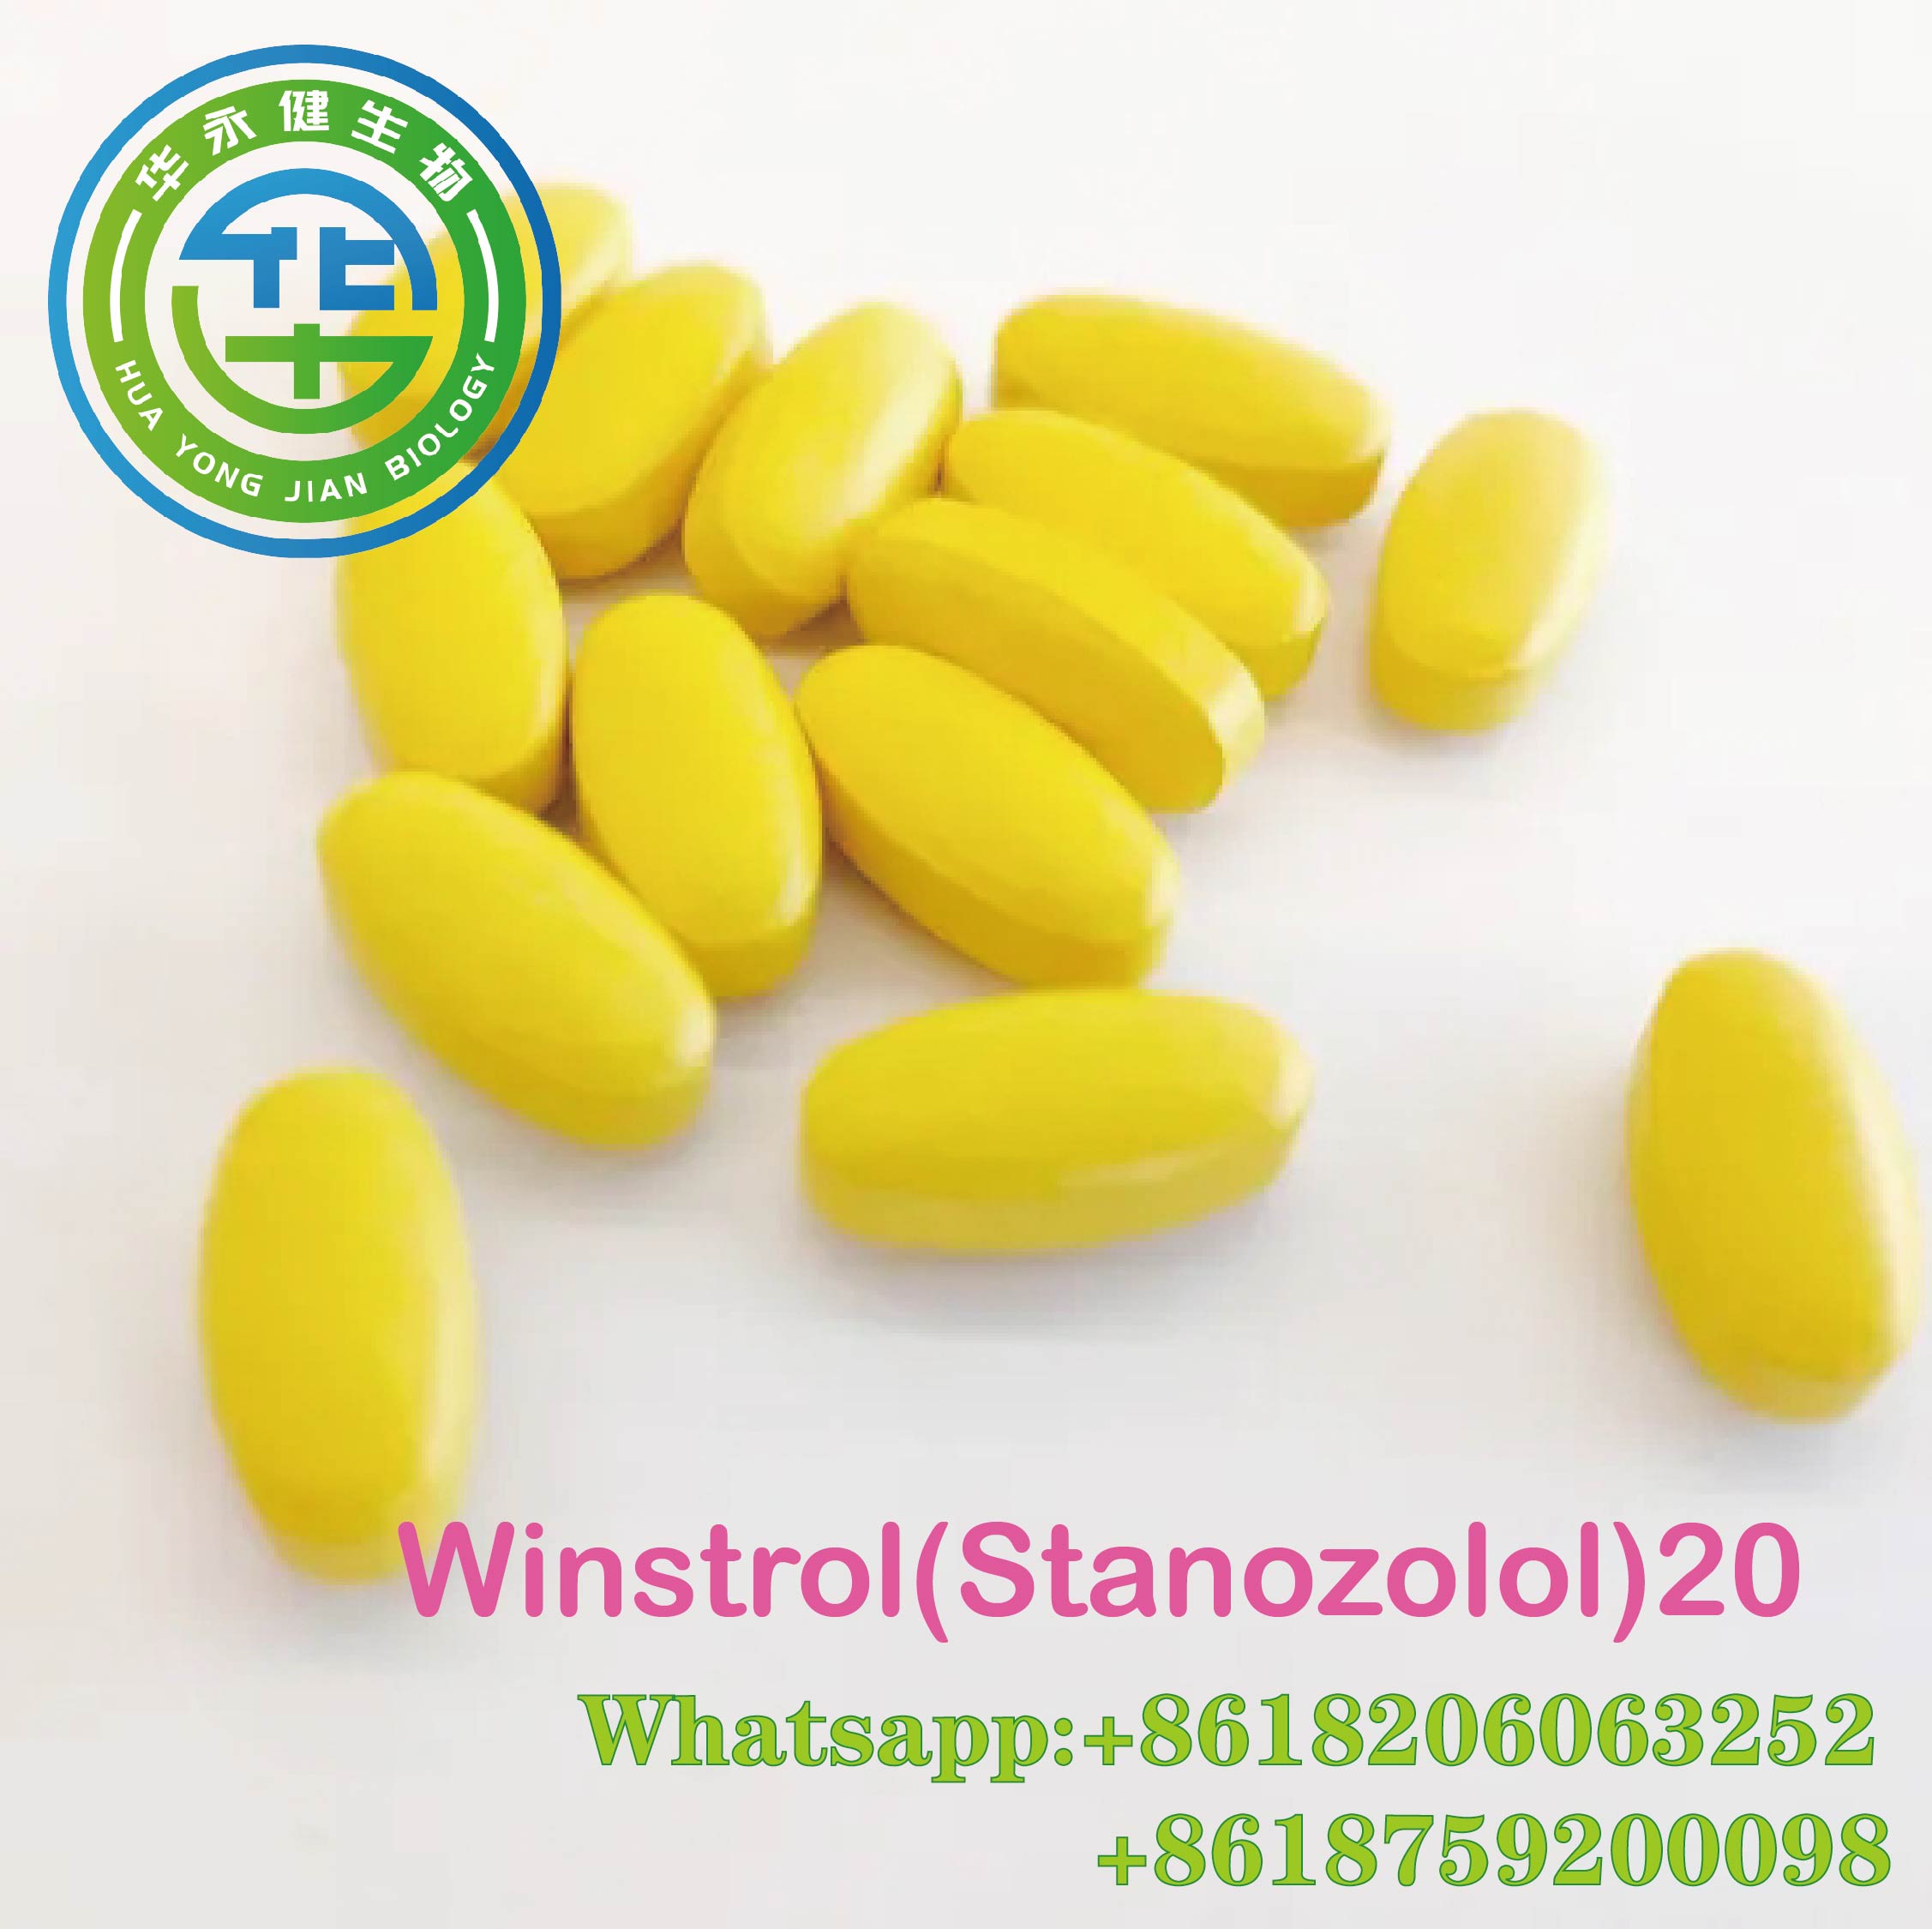 Stanozolol 20mg Oral Anabolic Steroids Winstrol 20mg*100pcs/bottle CAS 10418-03-8 For Bodybuilder